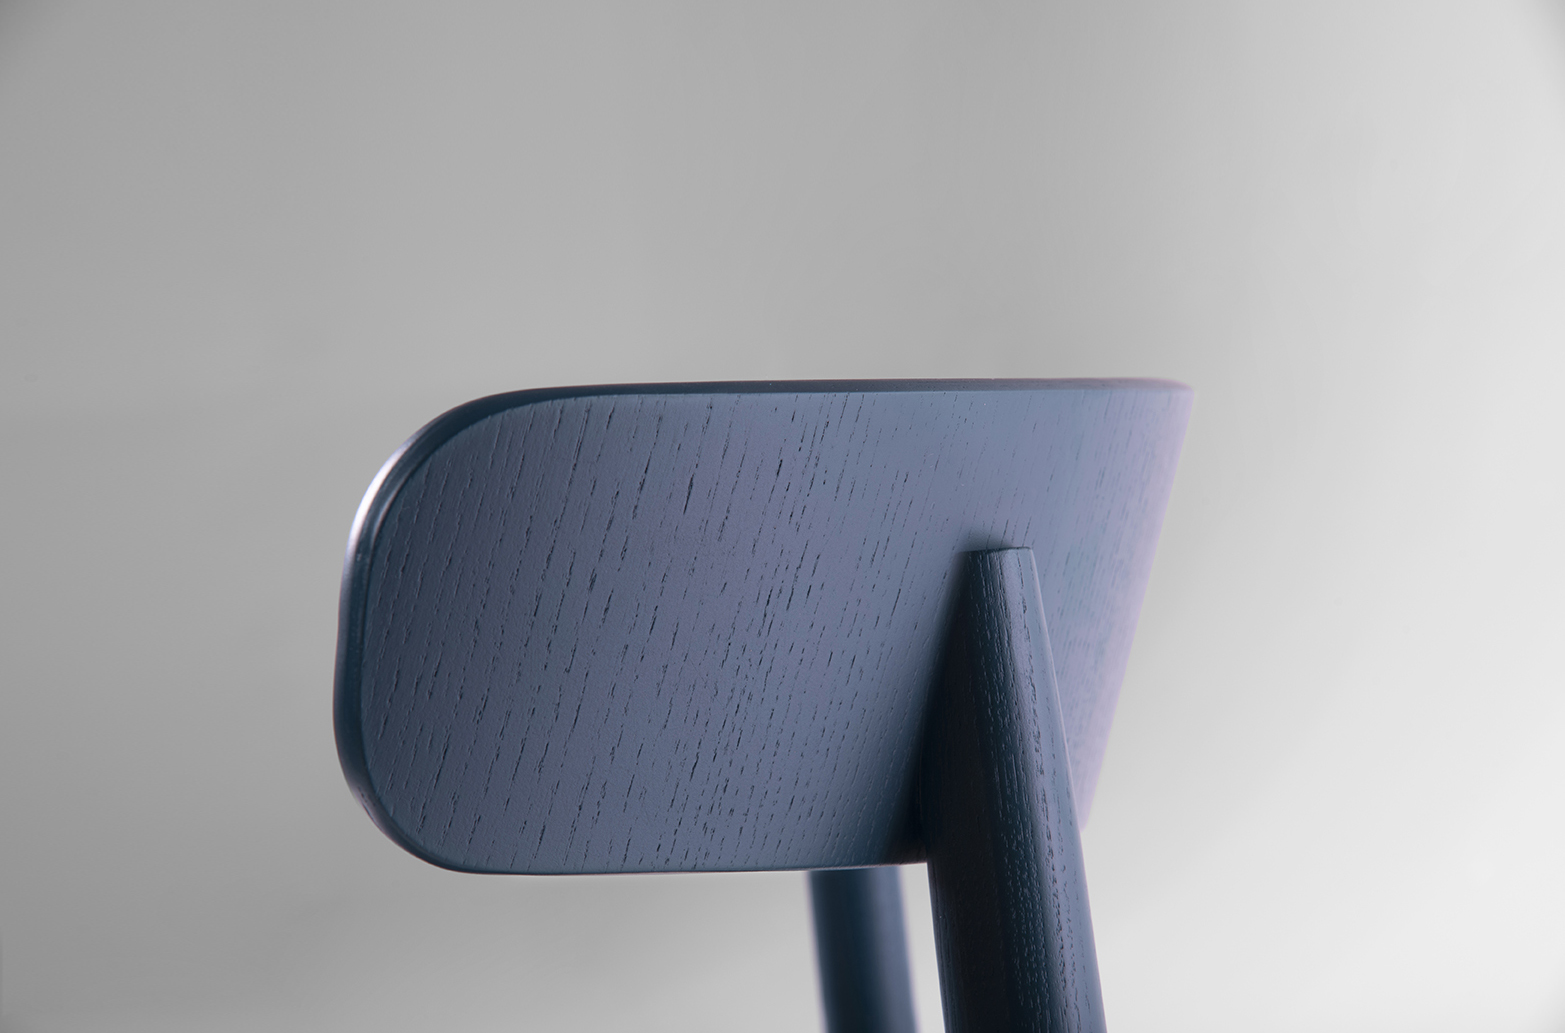 Detail of the Bison chair by Debiasi Sandri for Tekhne